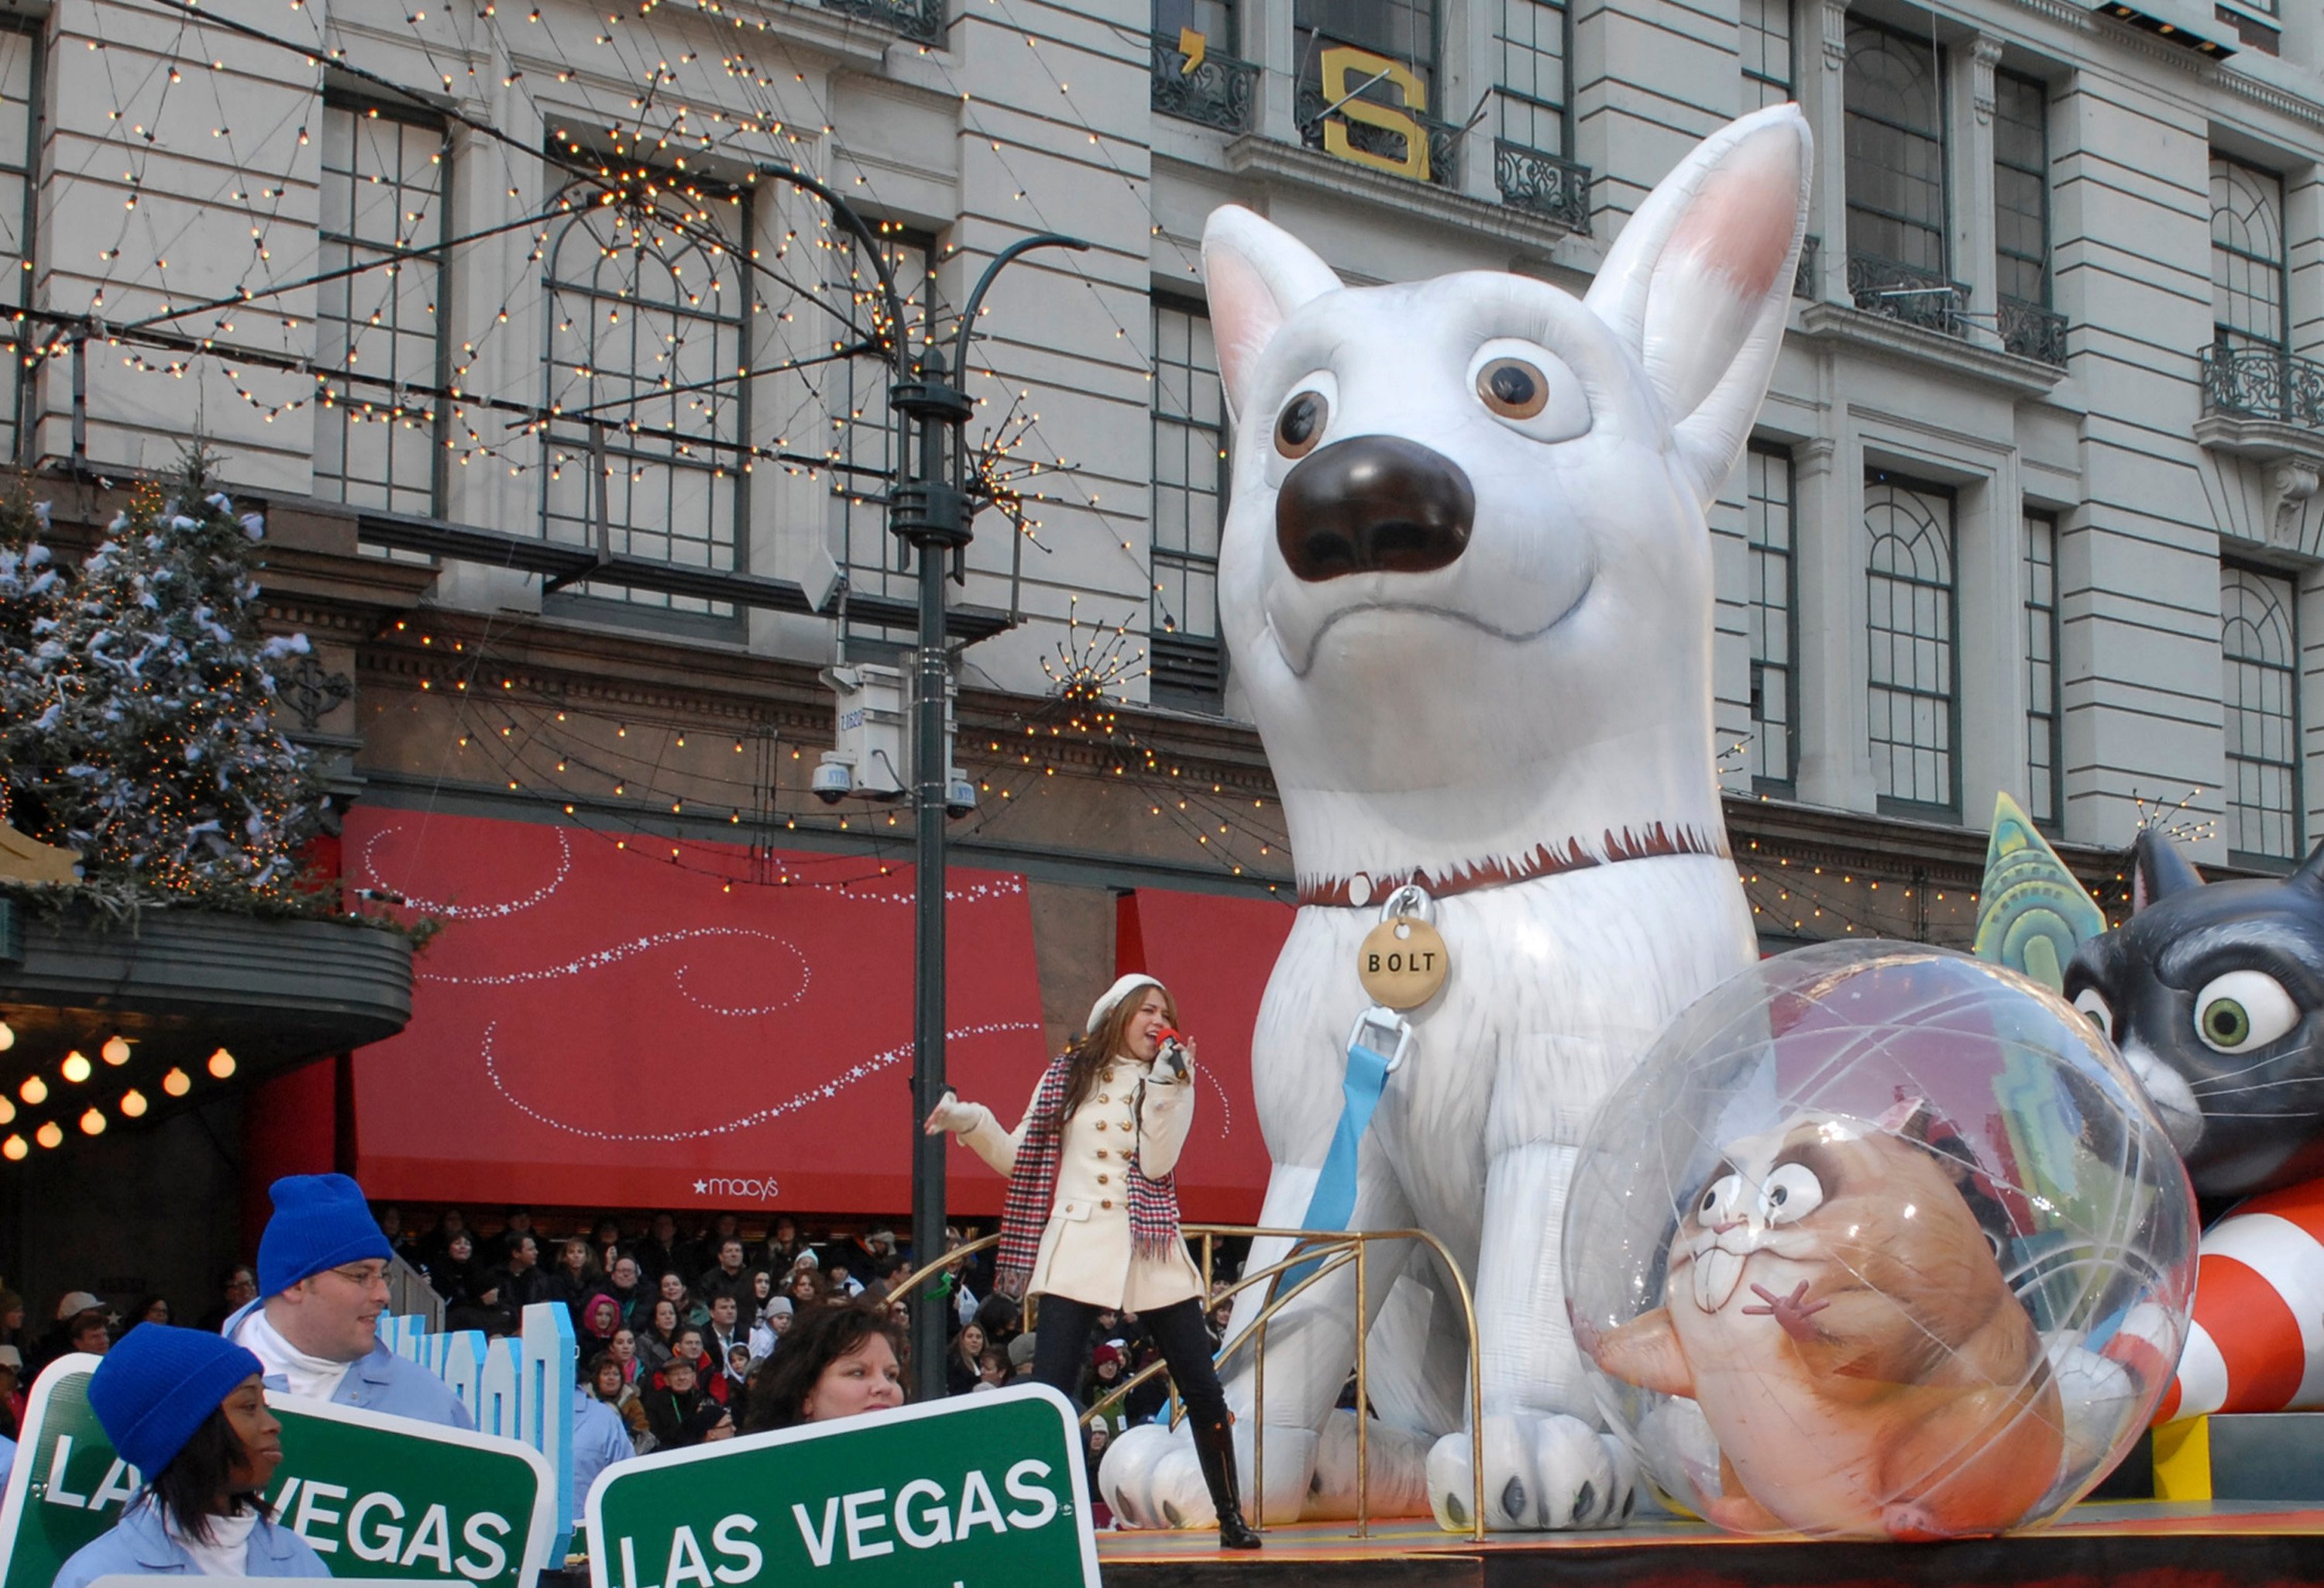 Miley Cyrus performs on a 'Bolt' themed float